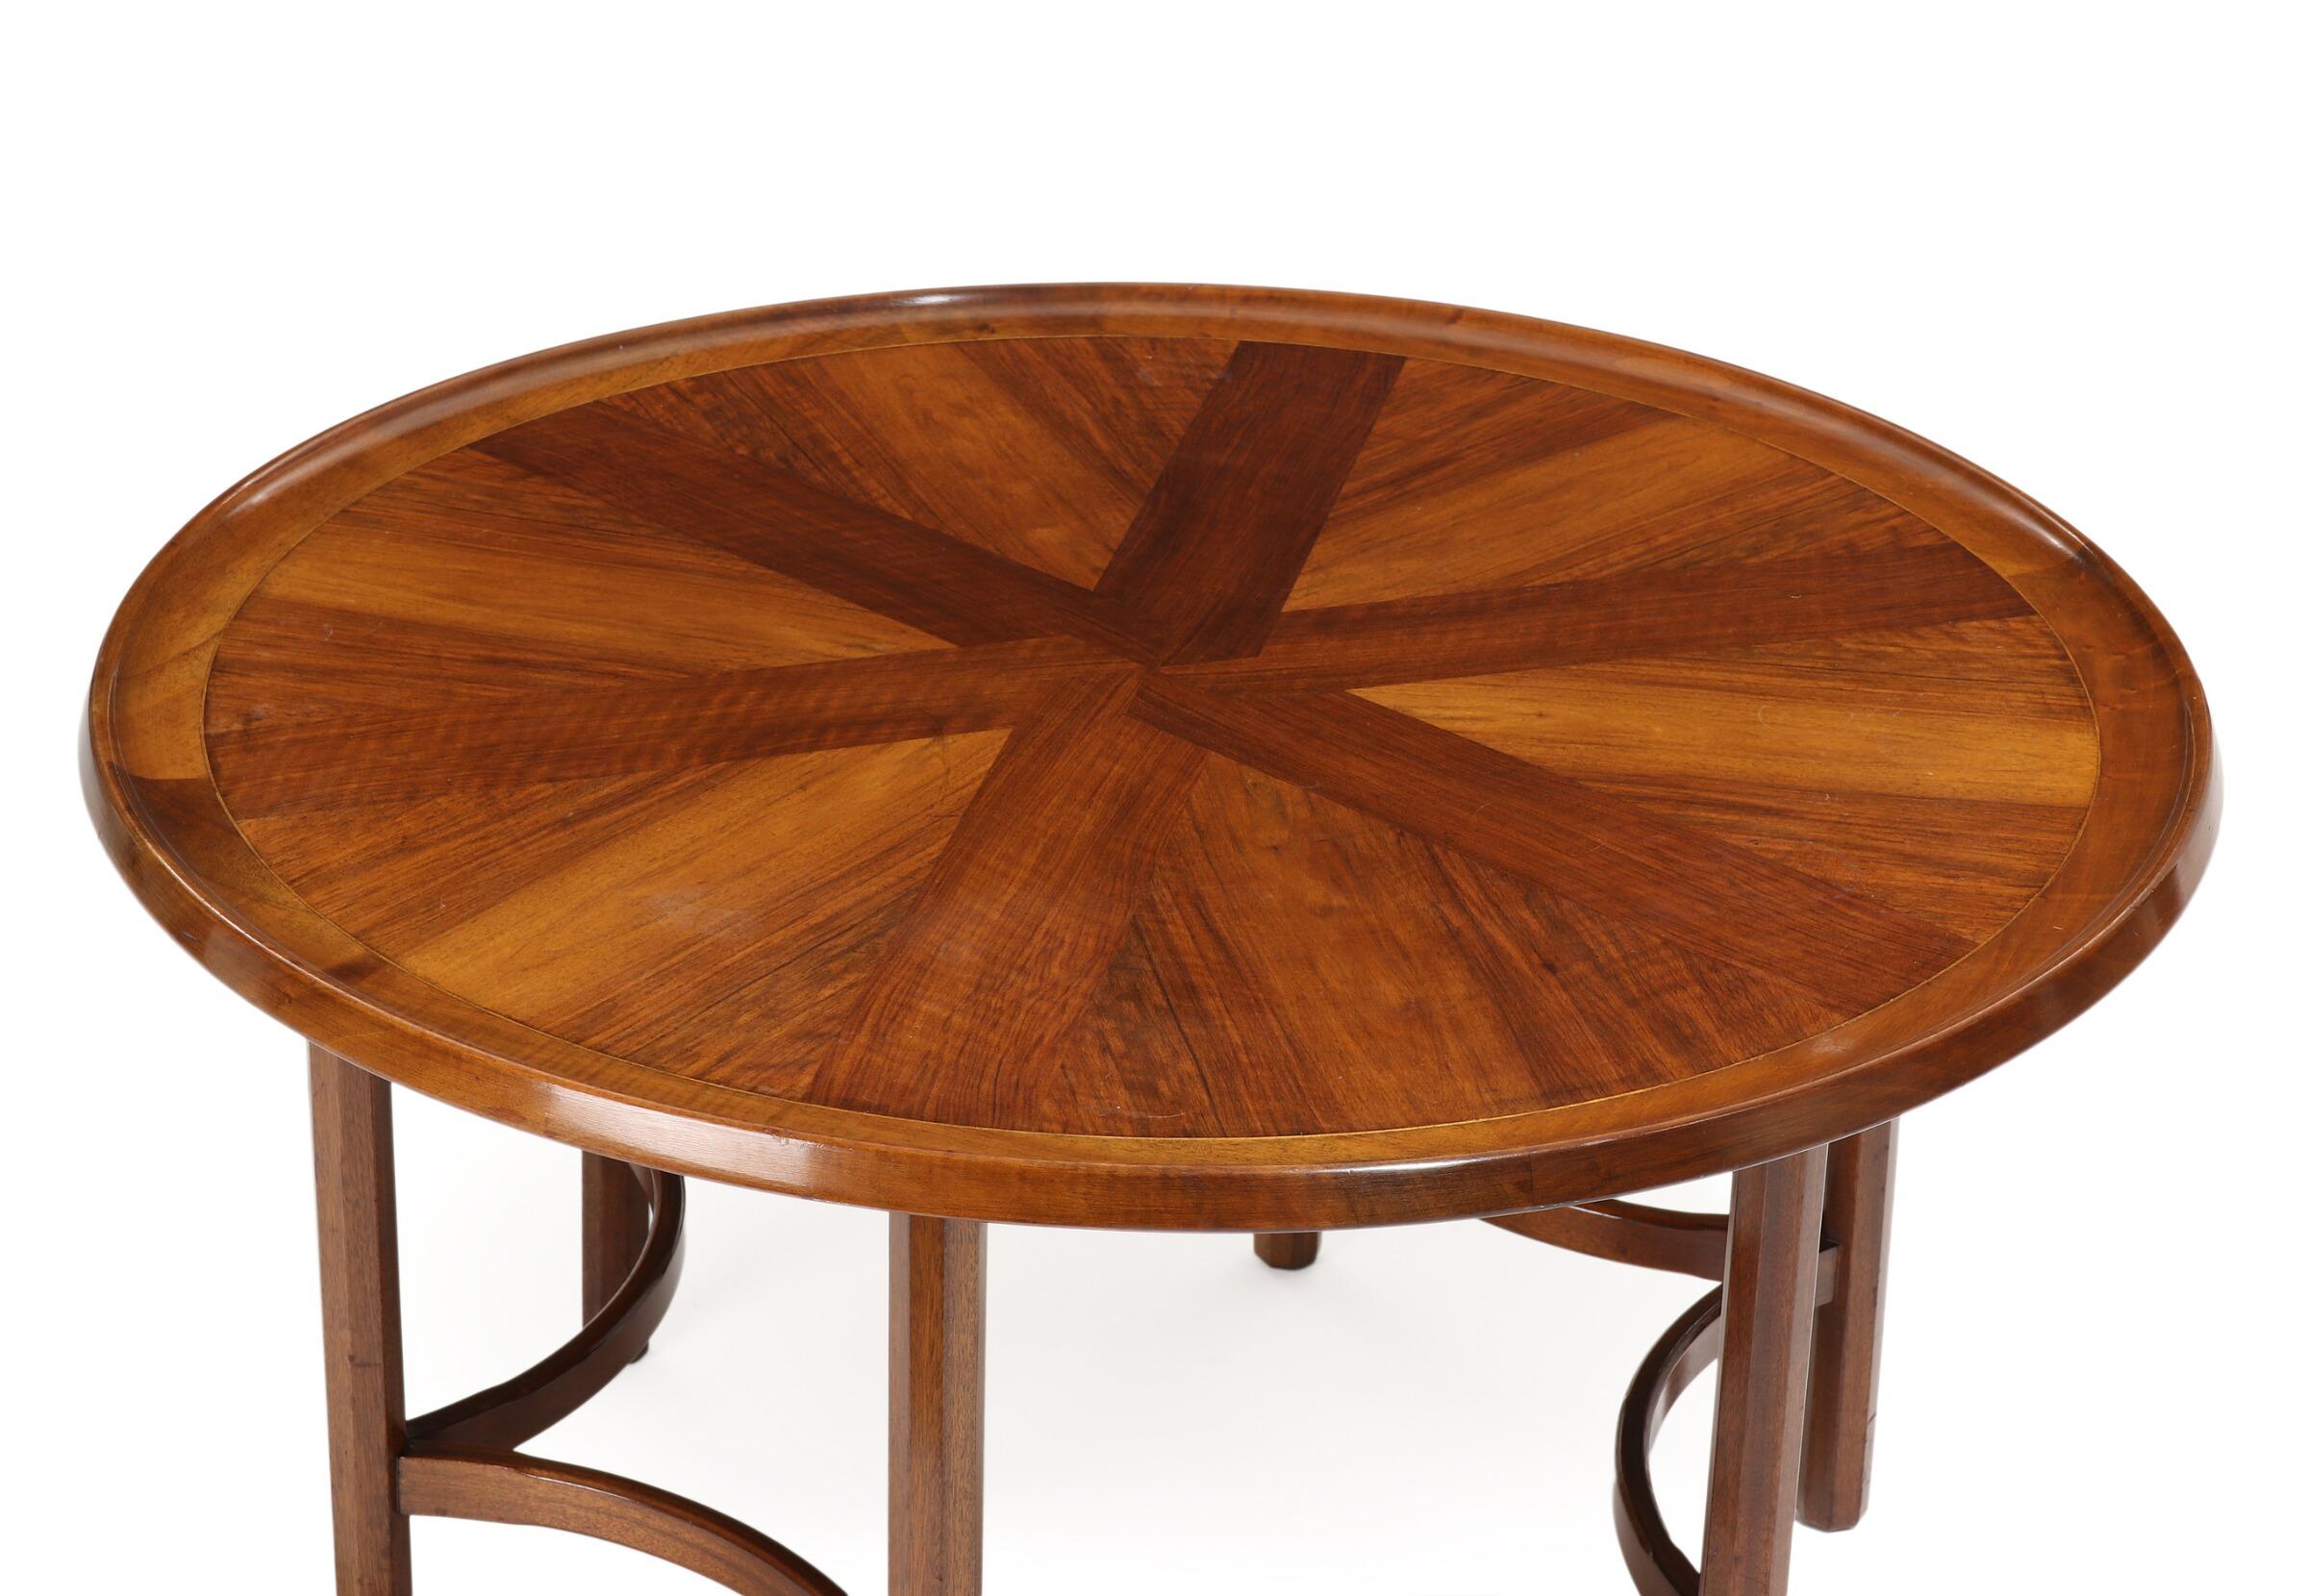 A Danish modern round coffee table of excellent design by a fine cabinetmaker, in walnut, the top being inlaid with walnut in a geometric pattern with a raised edge. The base, in ebonized wood is a standout, with curved stretchers, circa 1930s-1940s